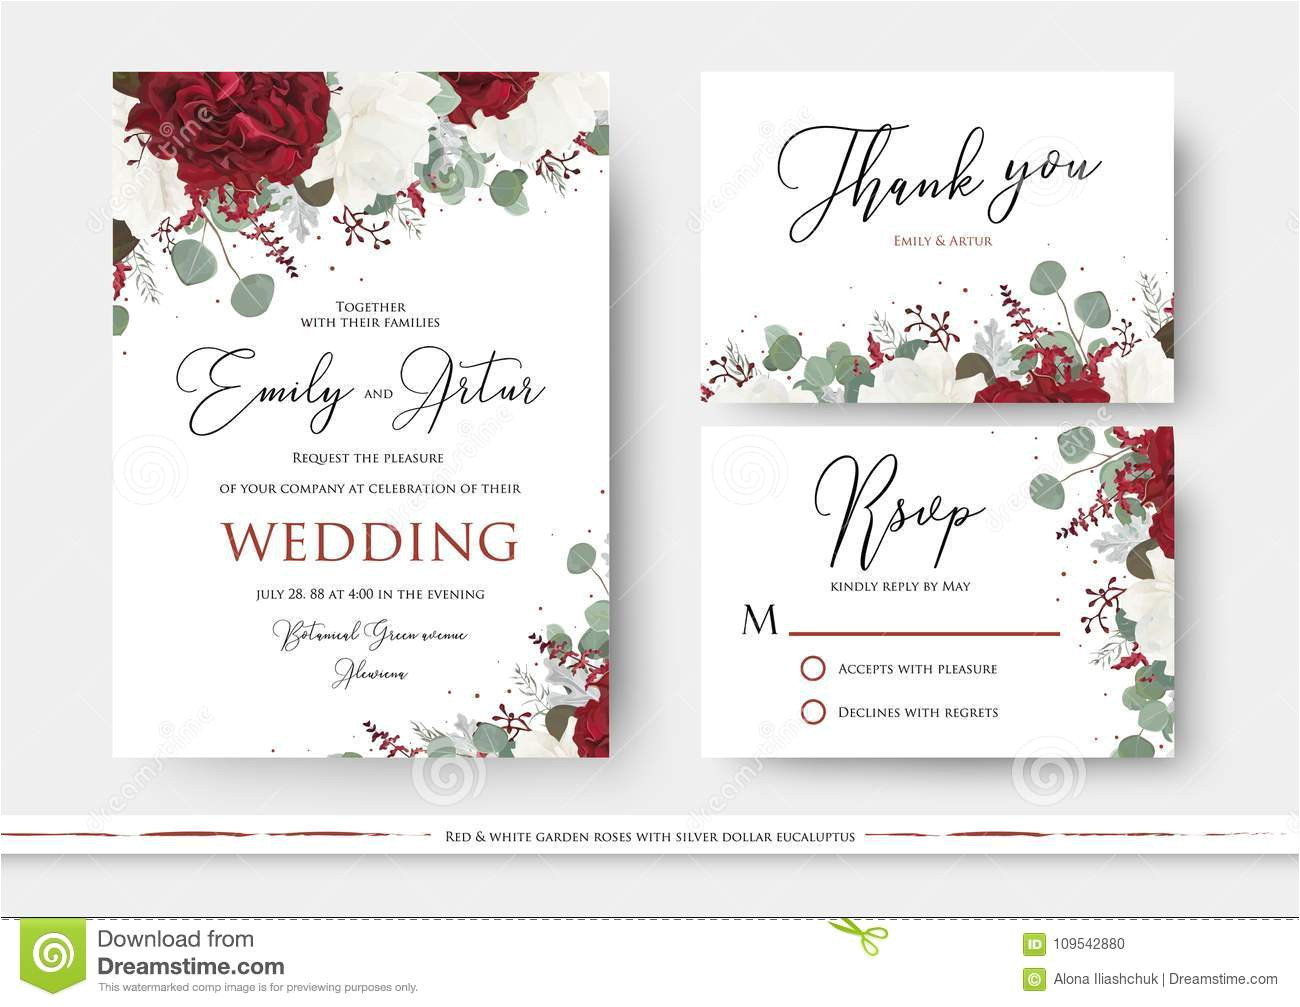 wedding floral invite save date thank you rsvp card desig wedding floral invite save date thank you rsvp card design image109542880